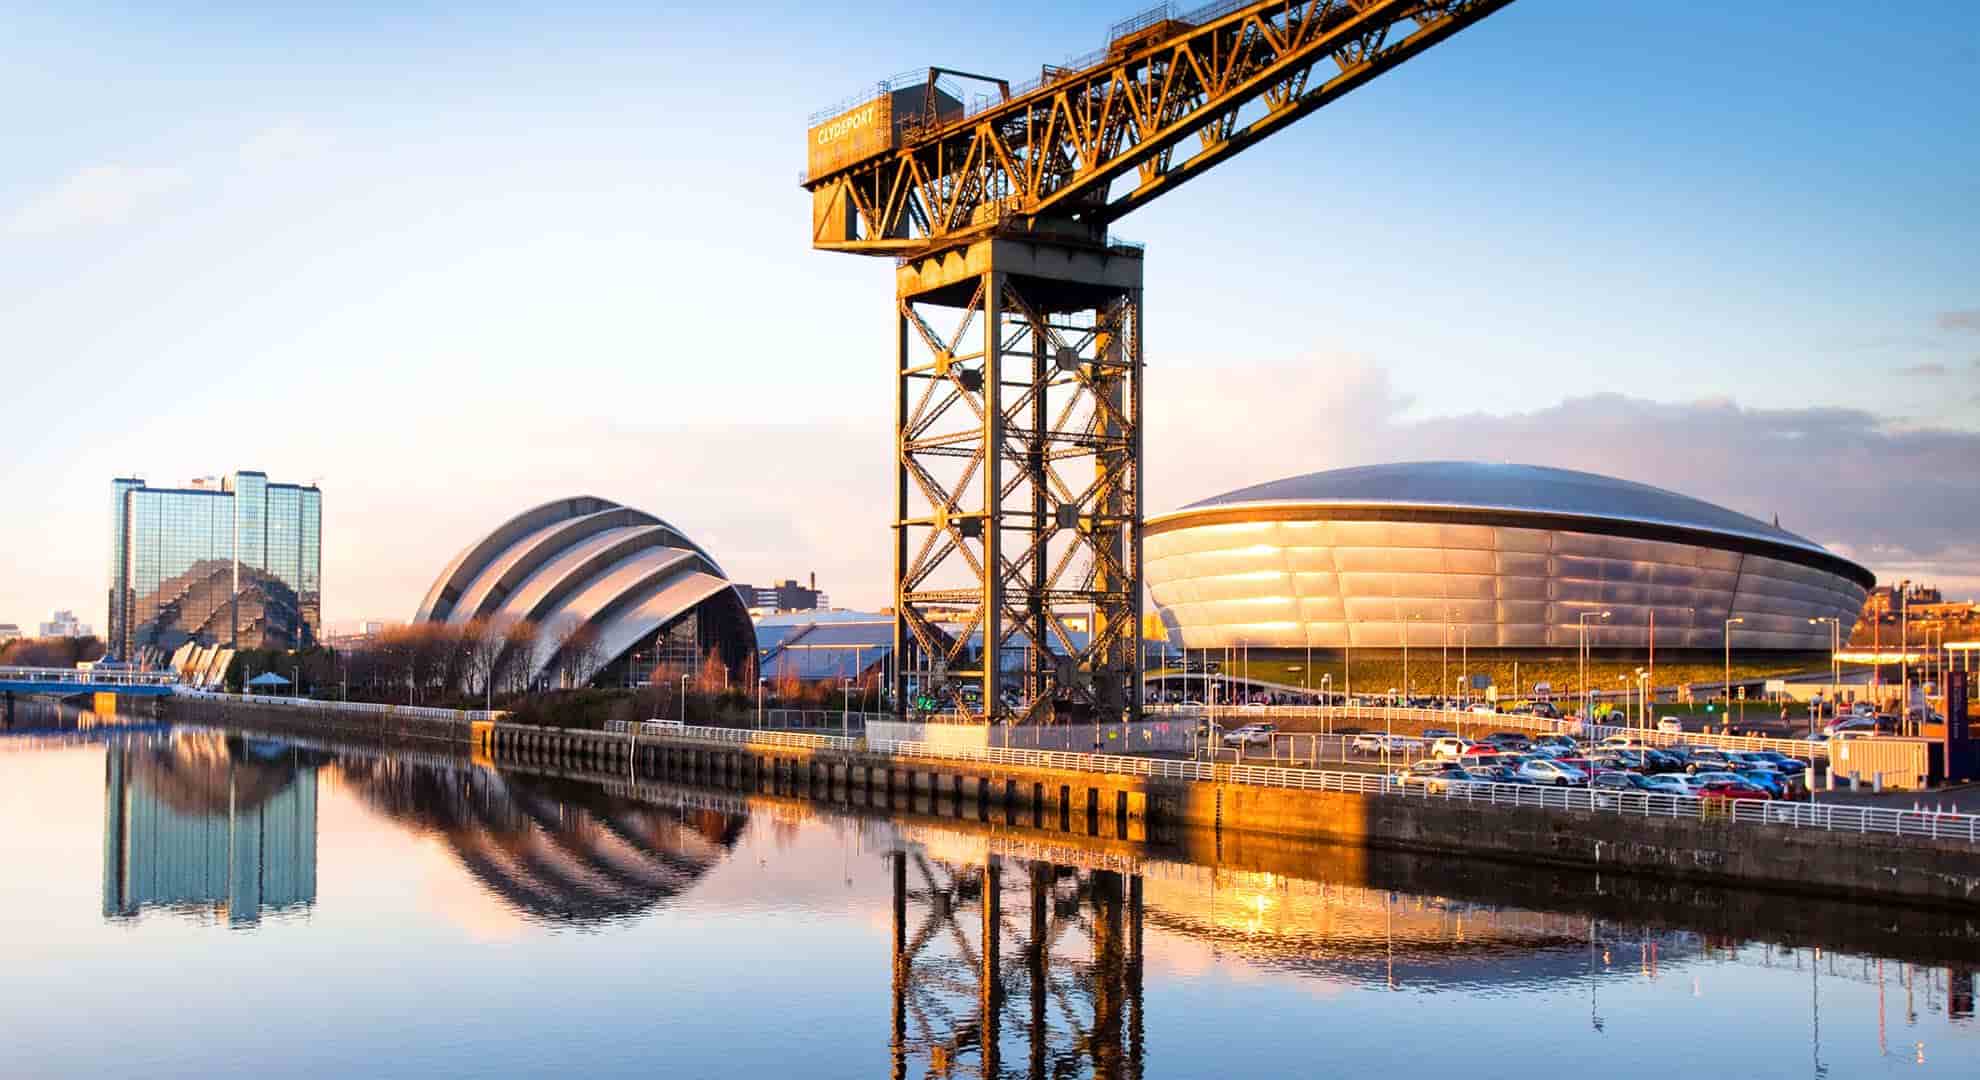 Photo of Finnieston Crane, the Hydro and the SEC Armadillo - the backdrop to COP26 in Glasgow